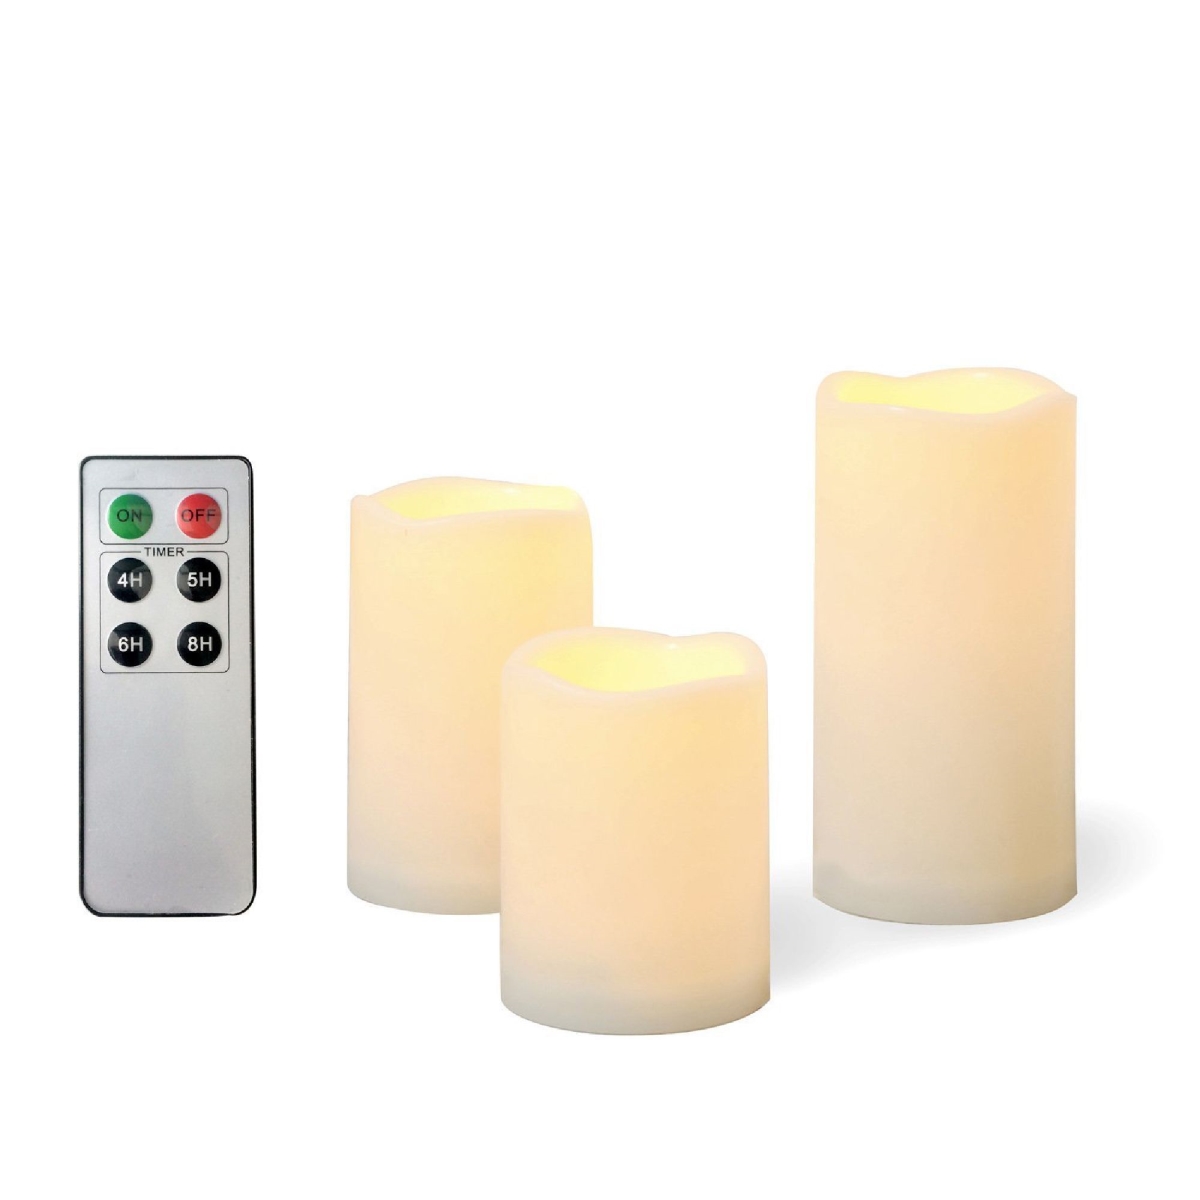 3 Piece Outdoor Waterproof Flameless Candles With Remote Timer Plastic Realistic Flickering Battery Operated Led Pillar Melted Edge - Pack Of 3